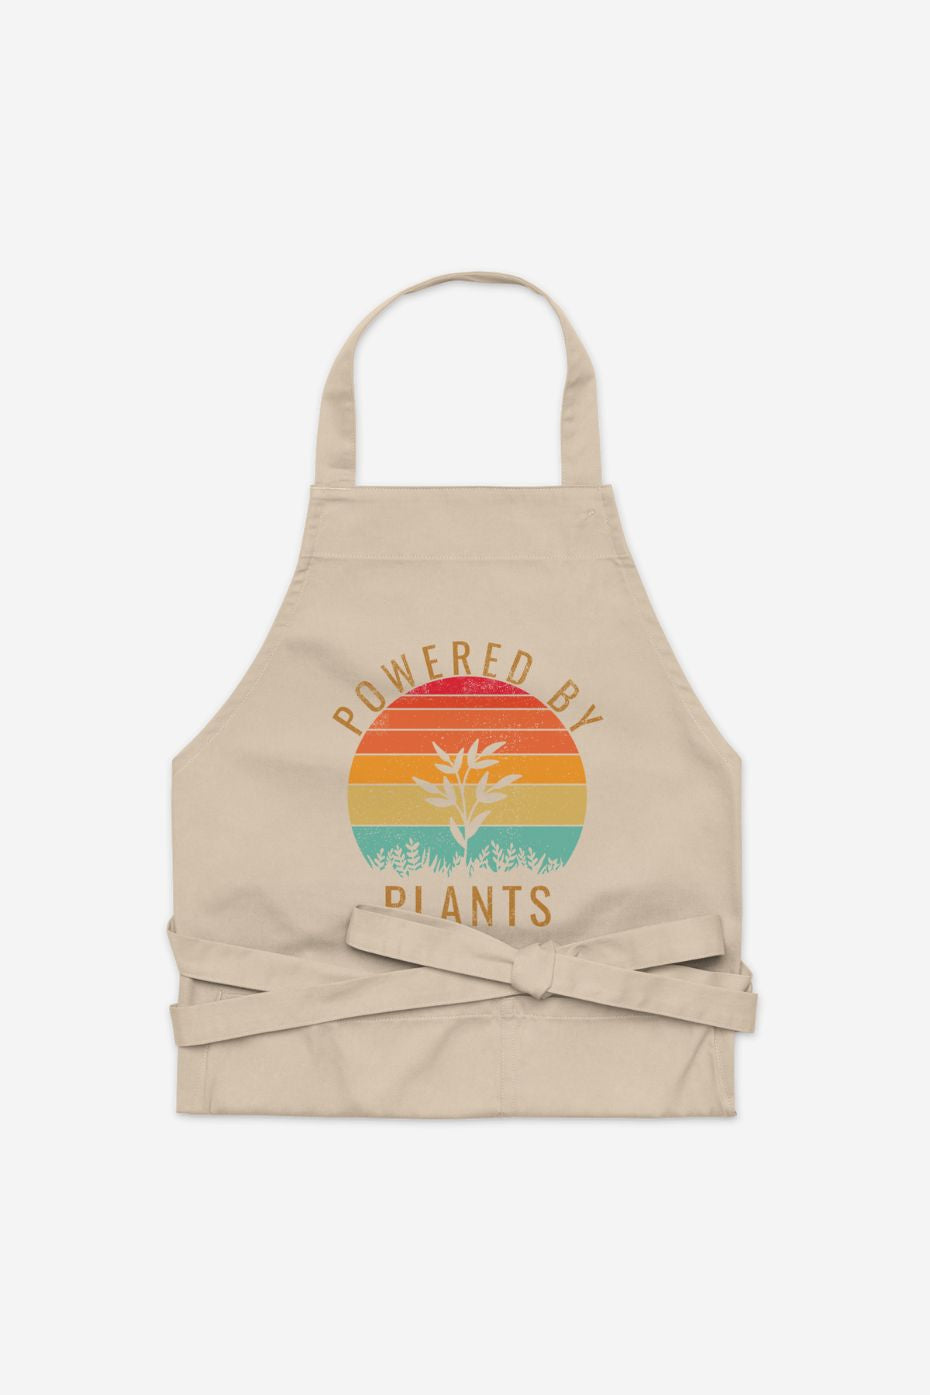 Powered By Plants - Organic cotton apron